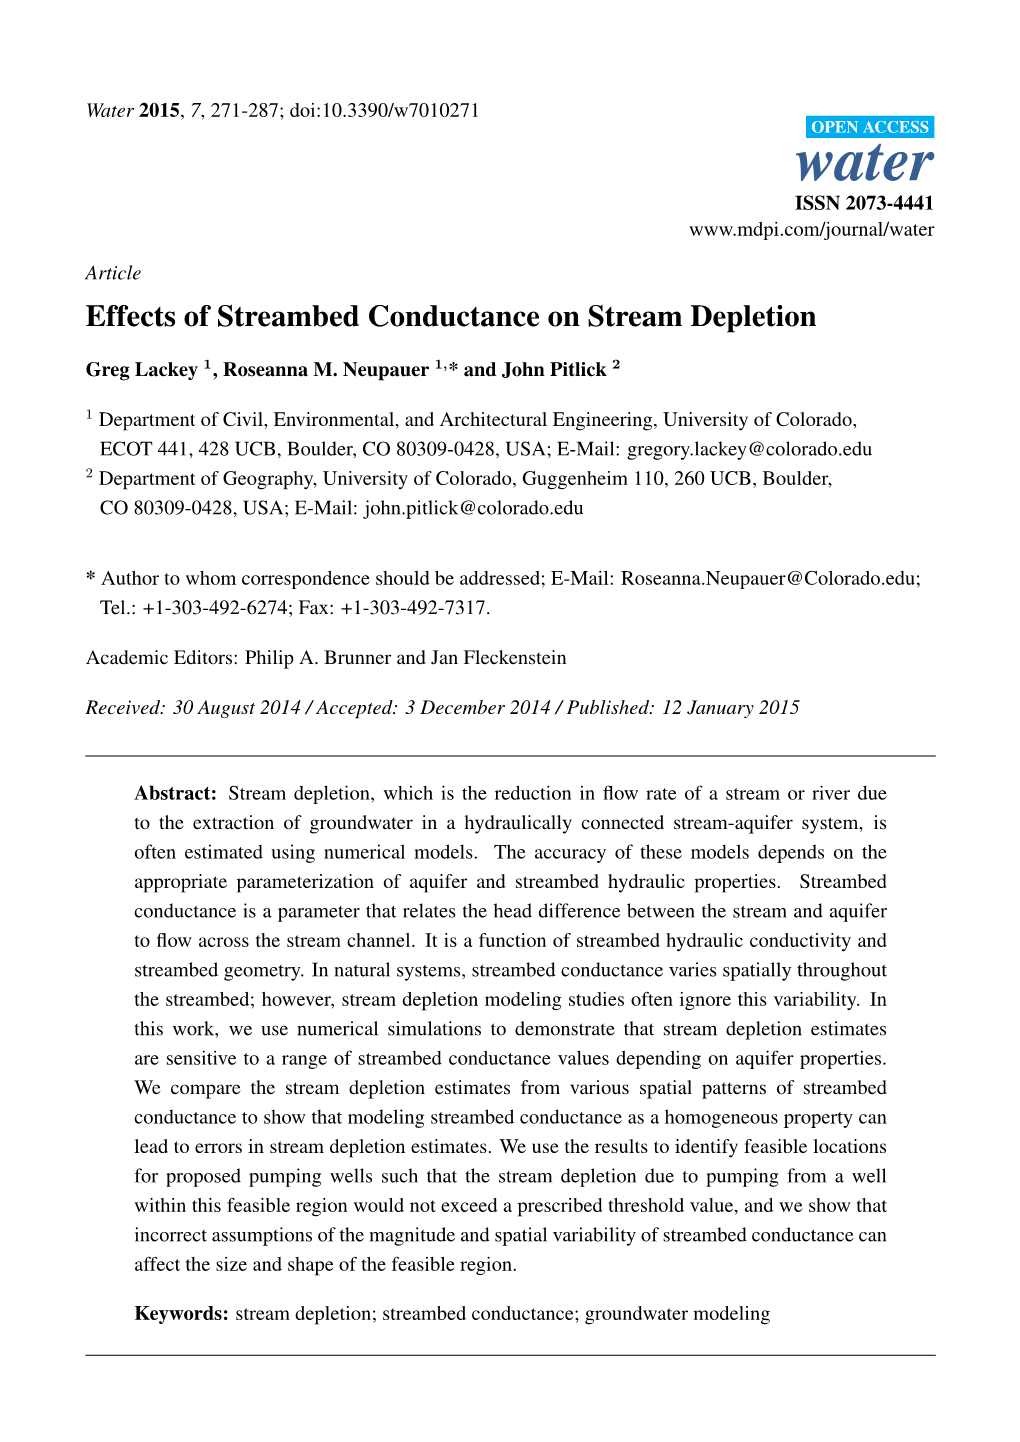 Effects of Streambed Conductance on Stream Depletion